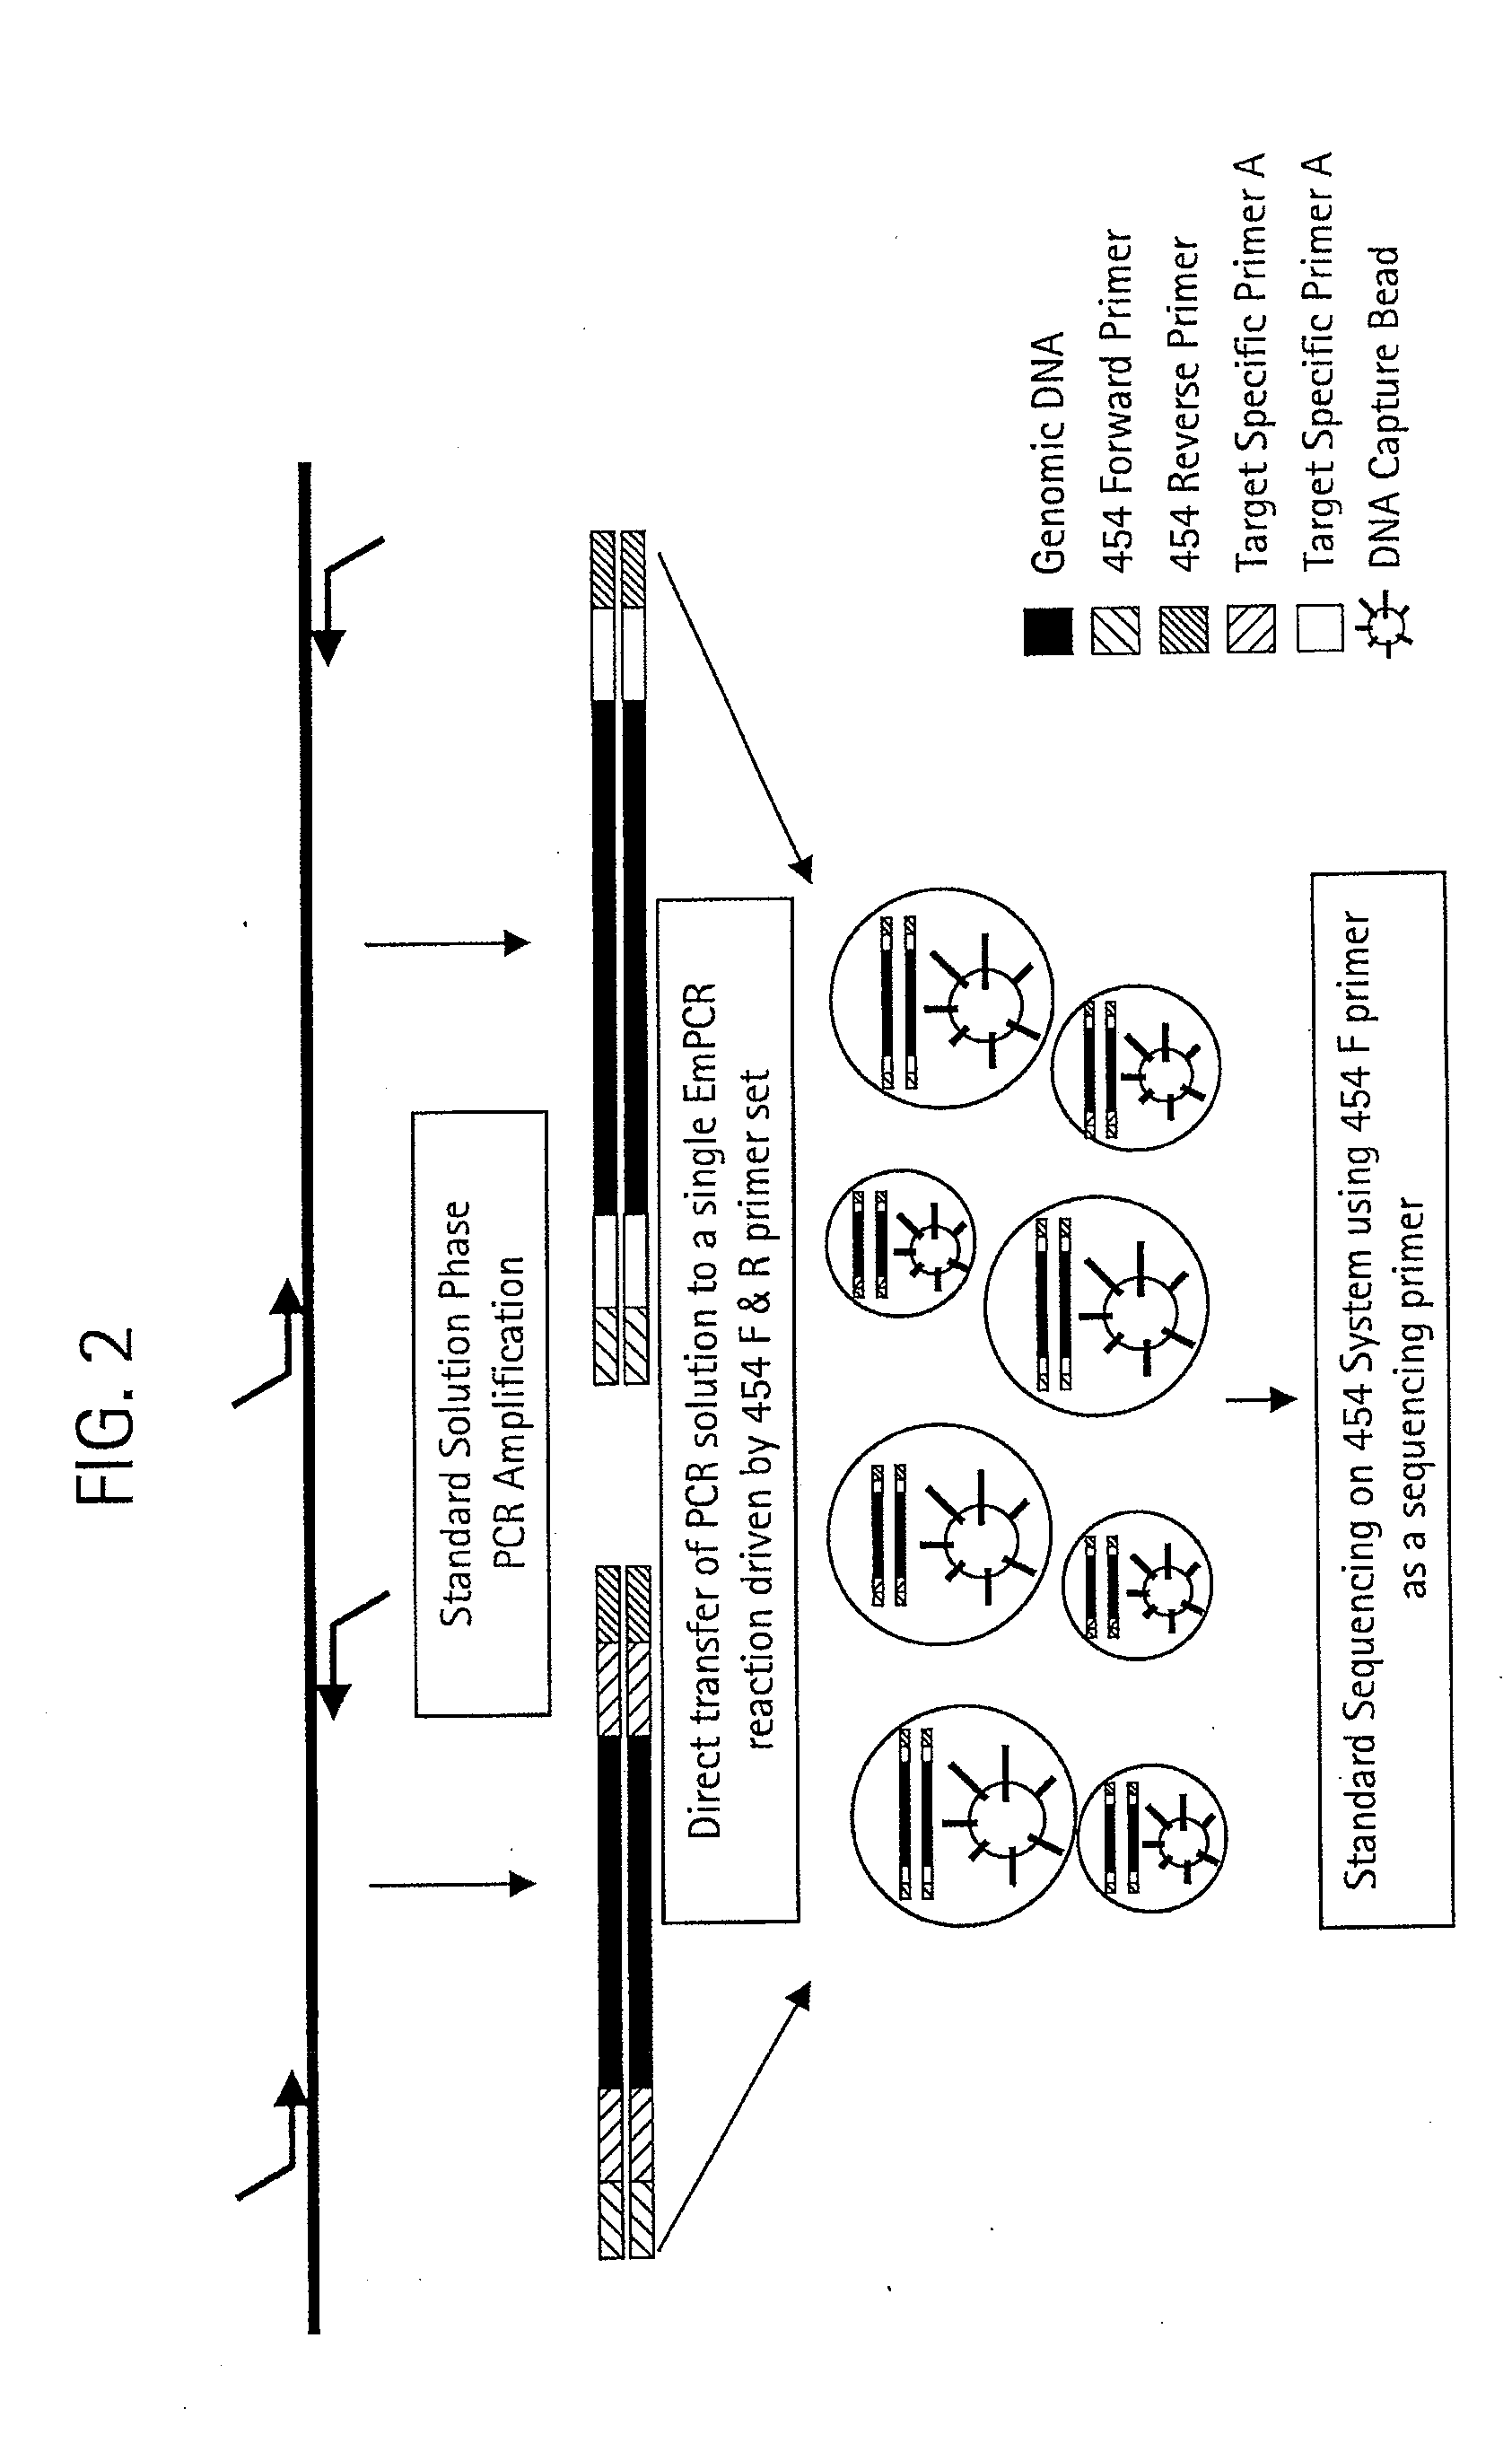 Methods for Determining Sequence Variants Using Ultra-Deep Sequencing